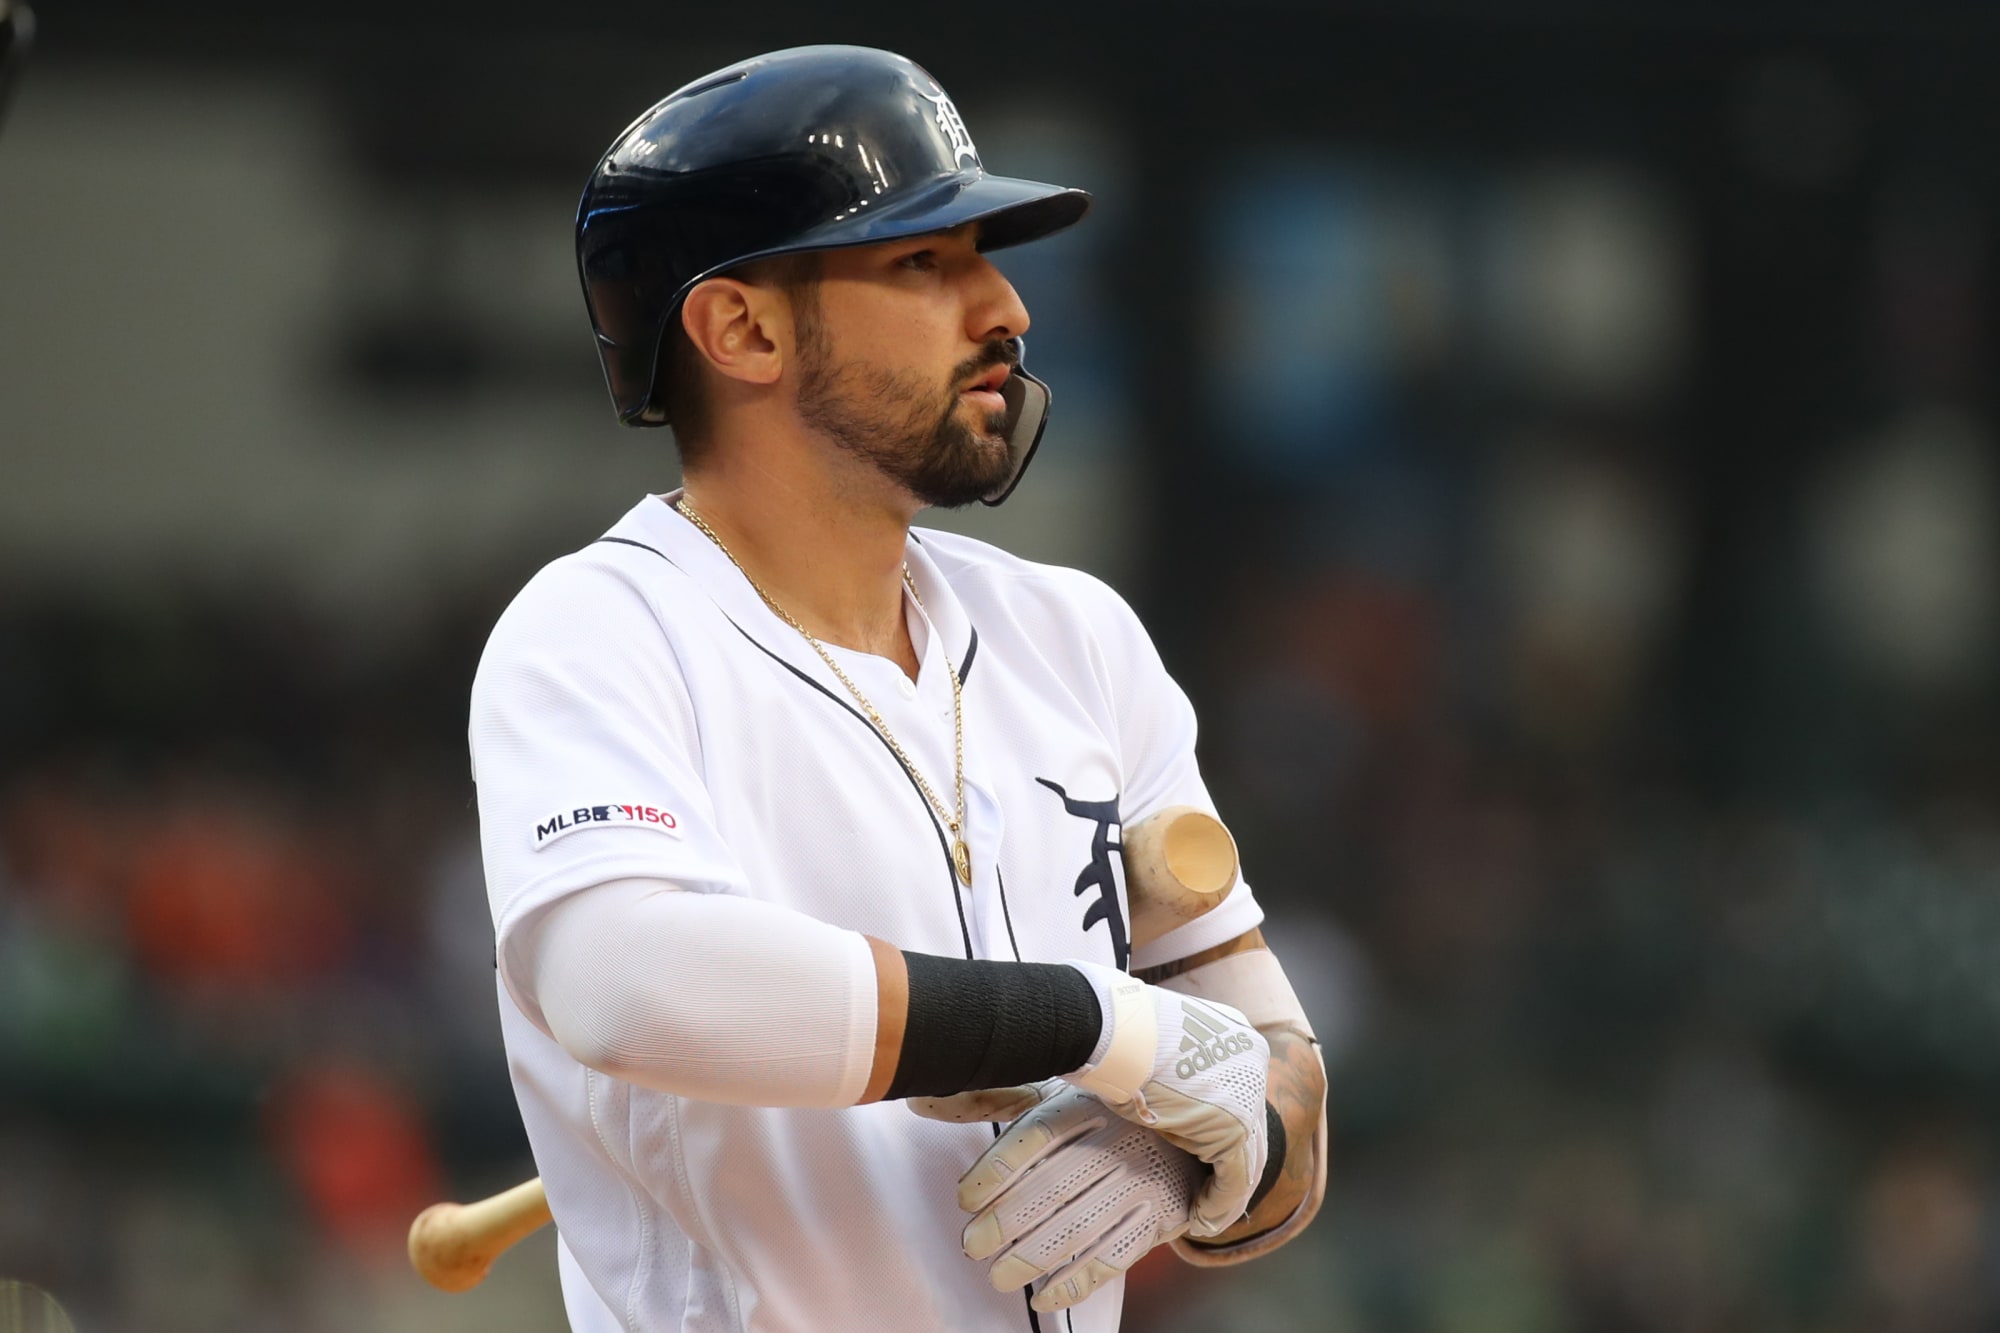 Nick Castellanos thinks it matters what position he plays